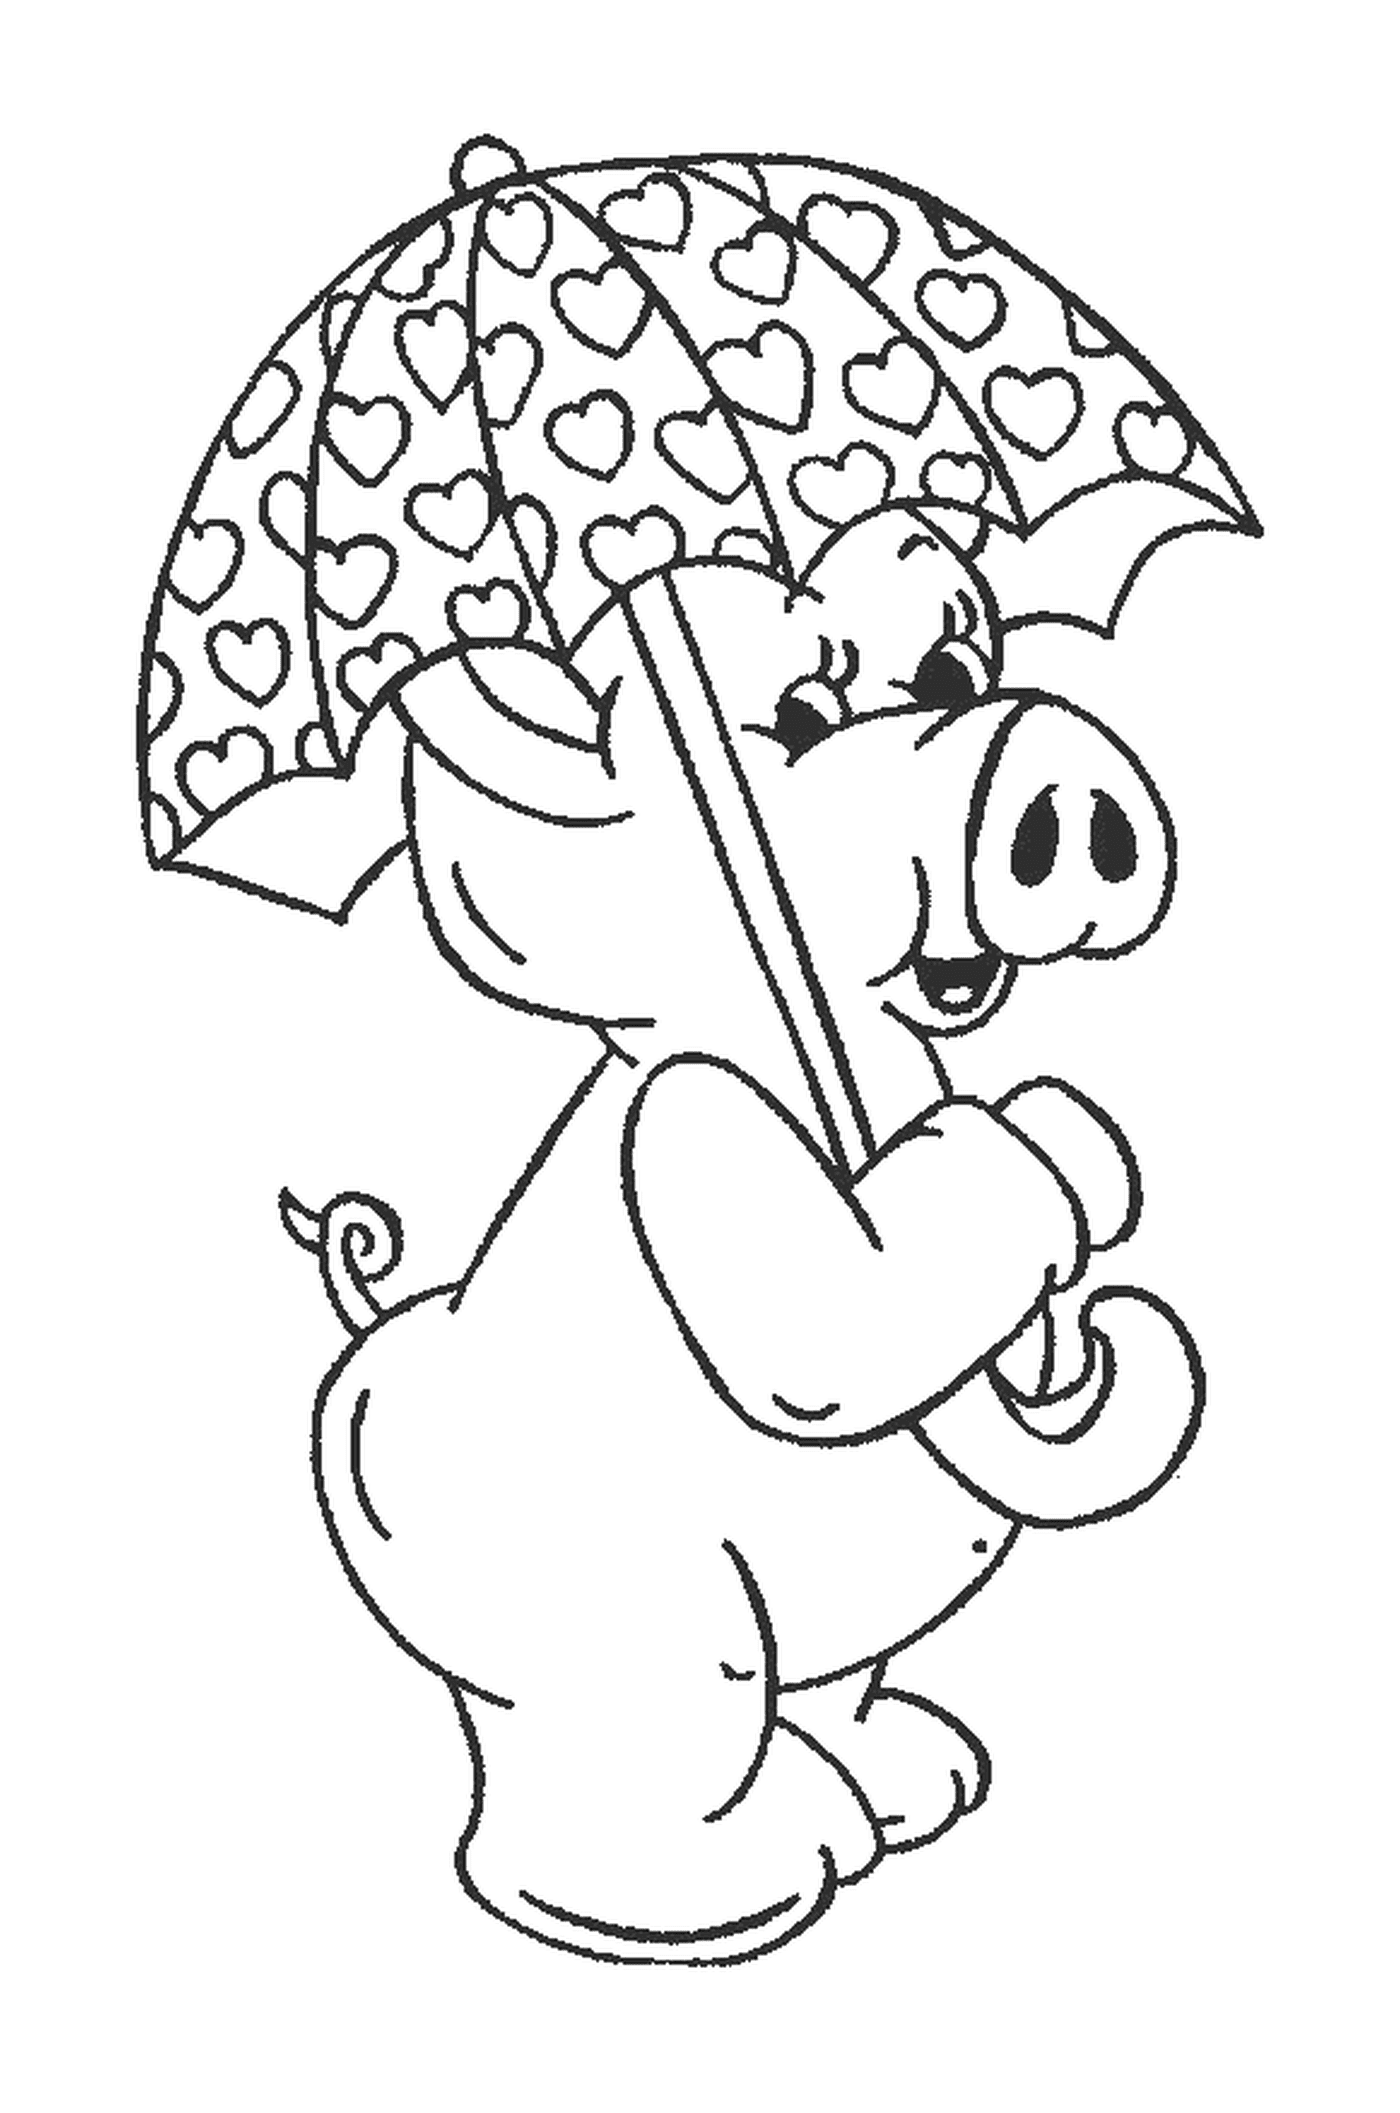  A pig holding an umbrella in his mouth 